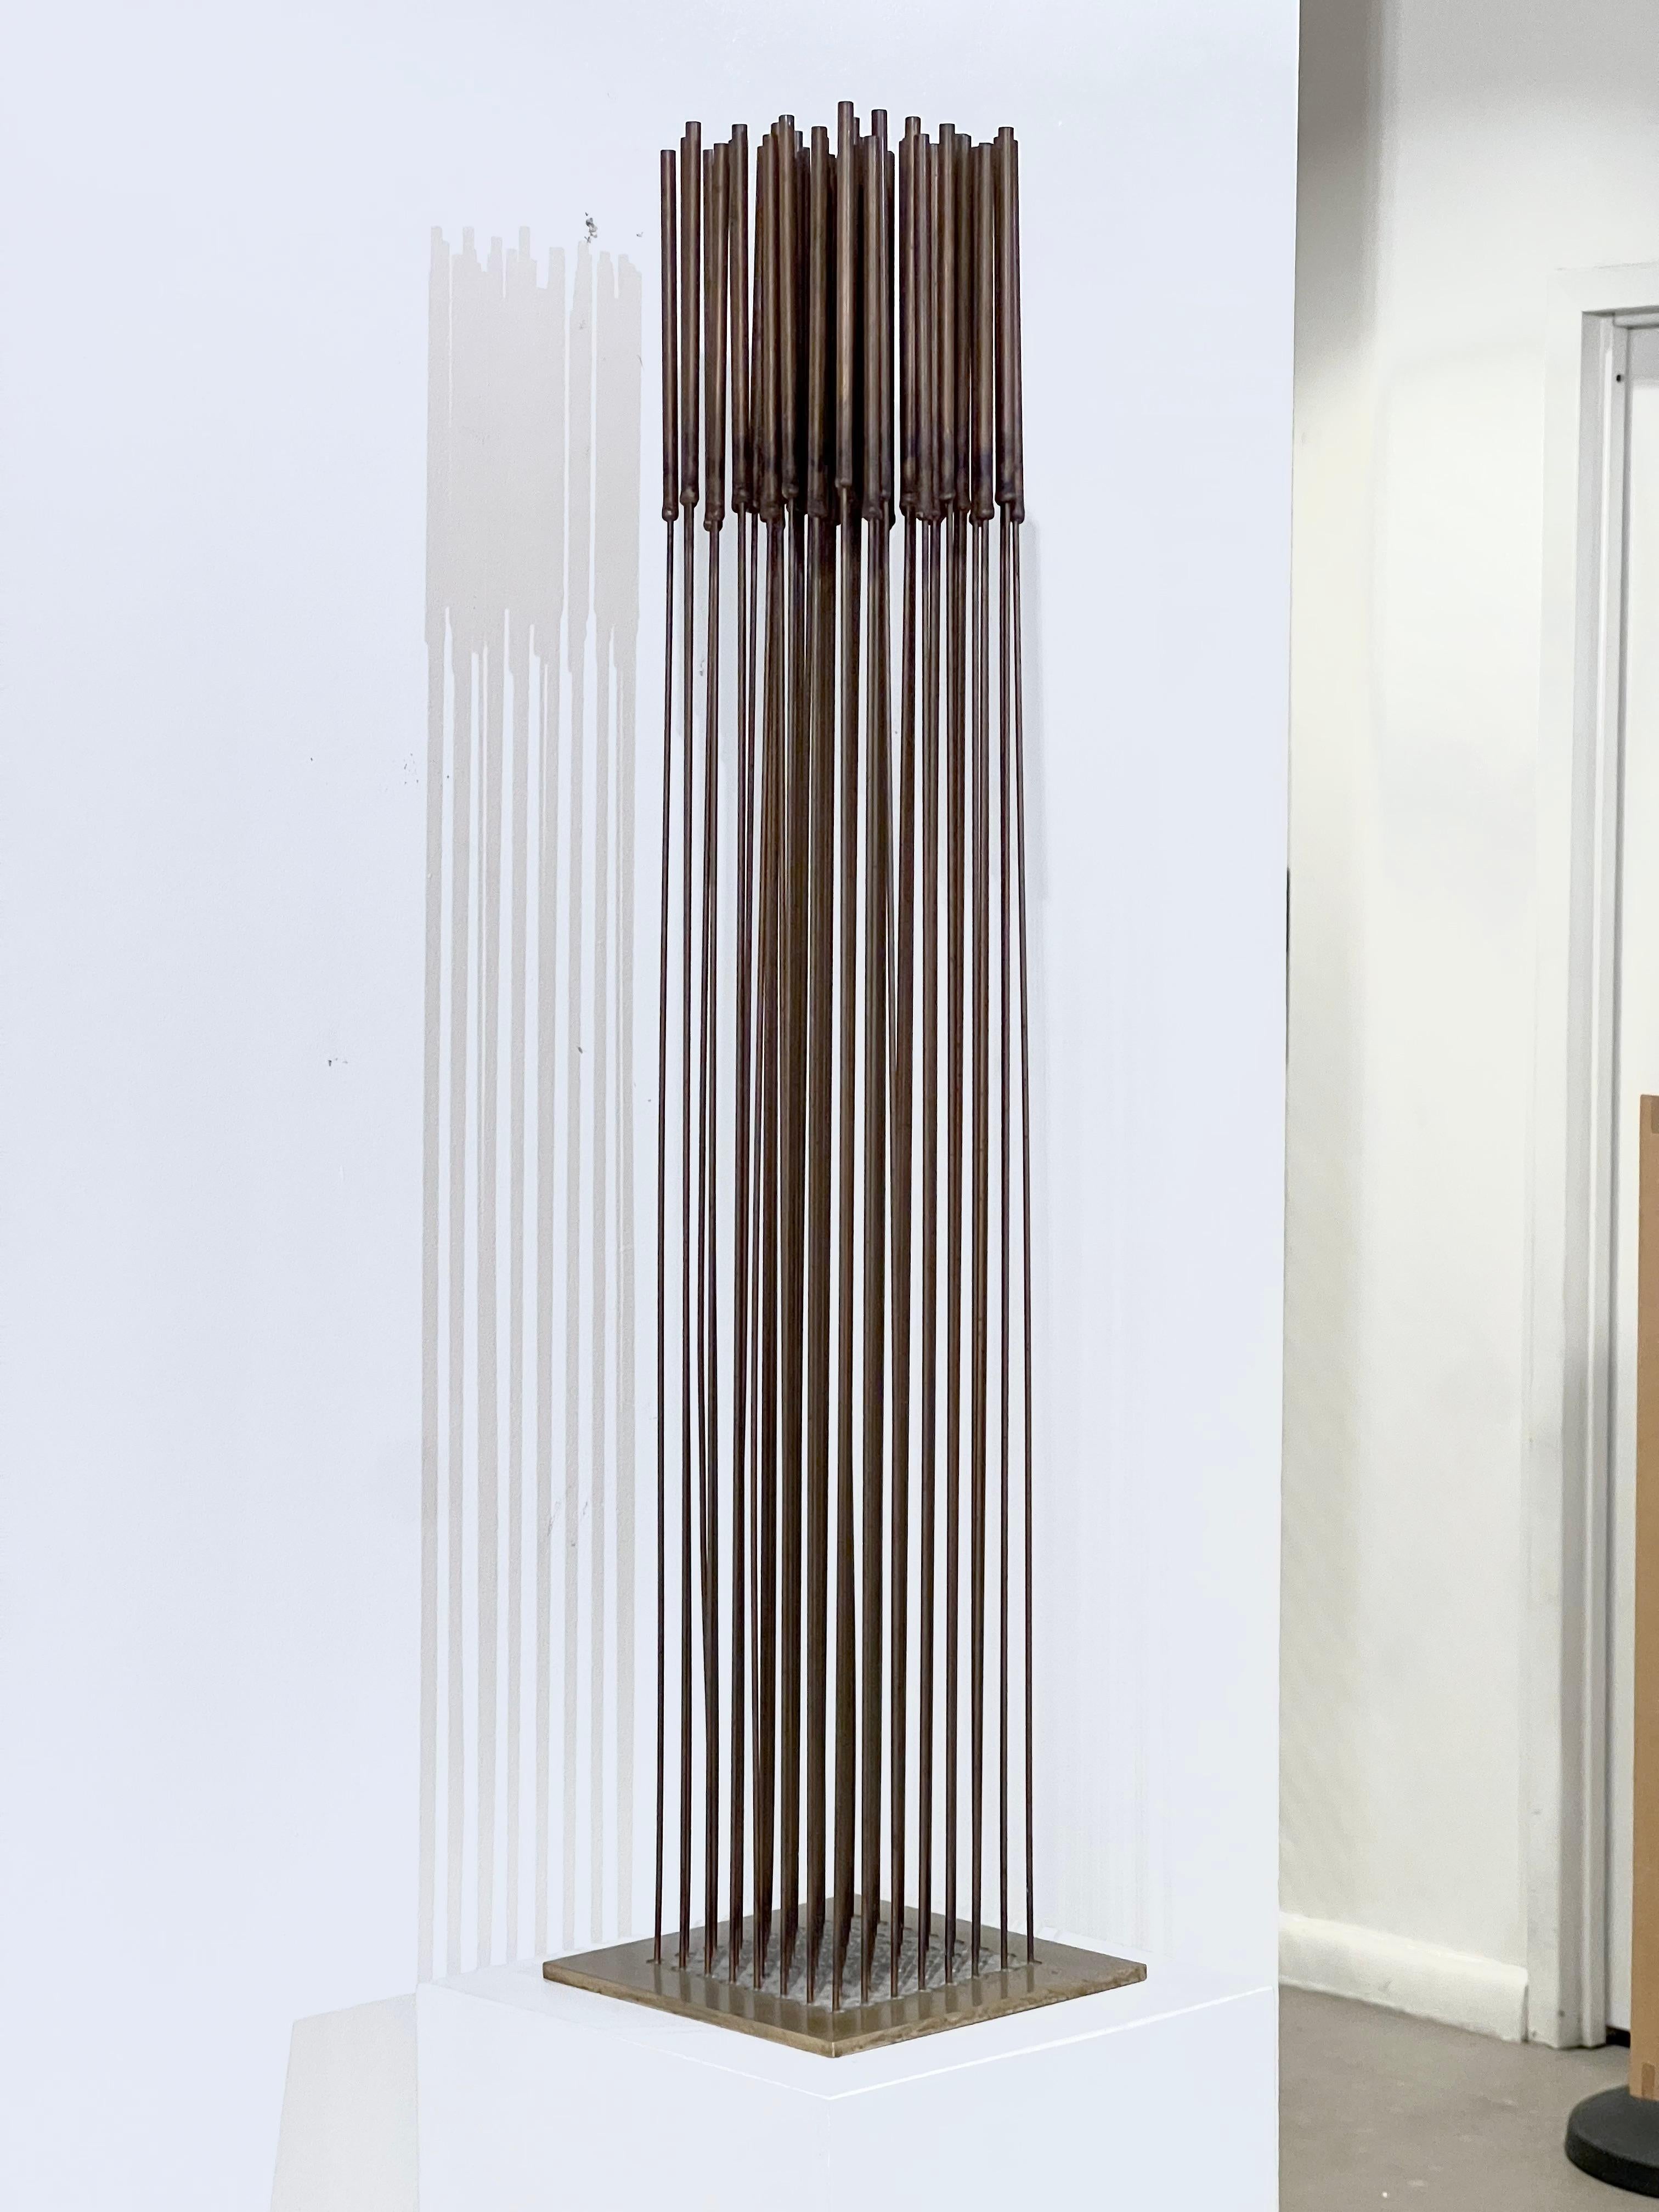 A sonambient rods sculpture by Harry Bertoia (1915-1978). A desirable size for display in the home and a typically wonderful sound quality.